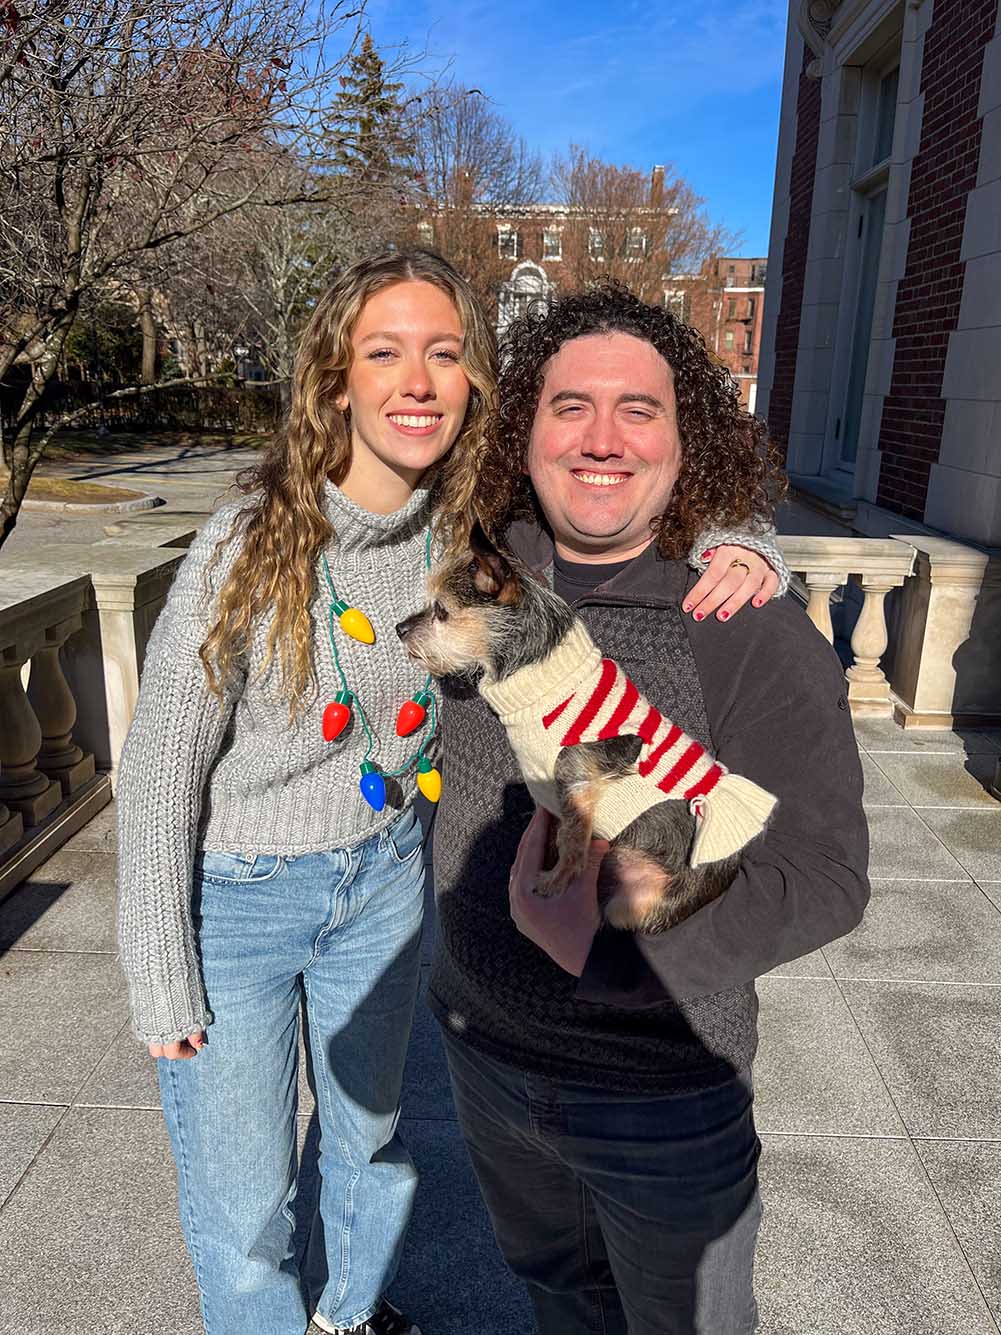 Photo: Two people stand and pose outside for a photo. On the left, a young white woman wearing a grey sweater, Christmas light necklace, and jeans poses with right arm over the shoulders of a white man with curly hair and wearing a black sweater and pants and holding a small dog wearing a holiday sweater. They both squint towards the camera and smile.